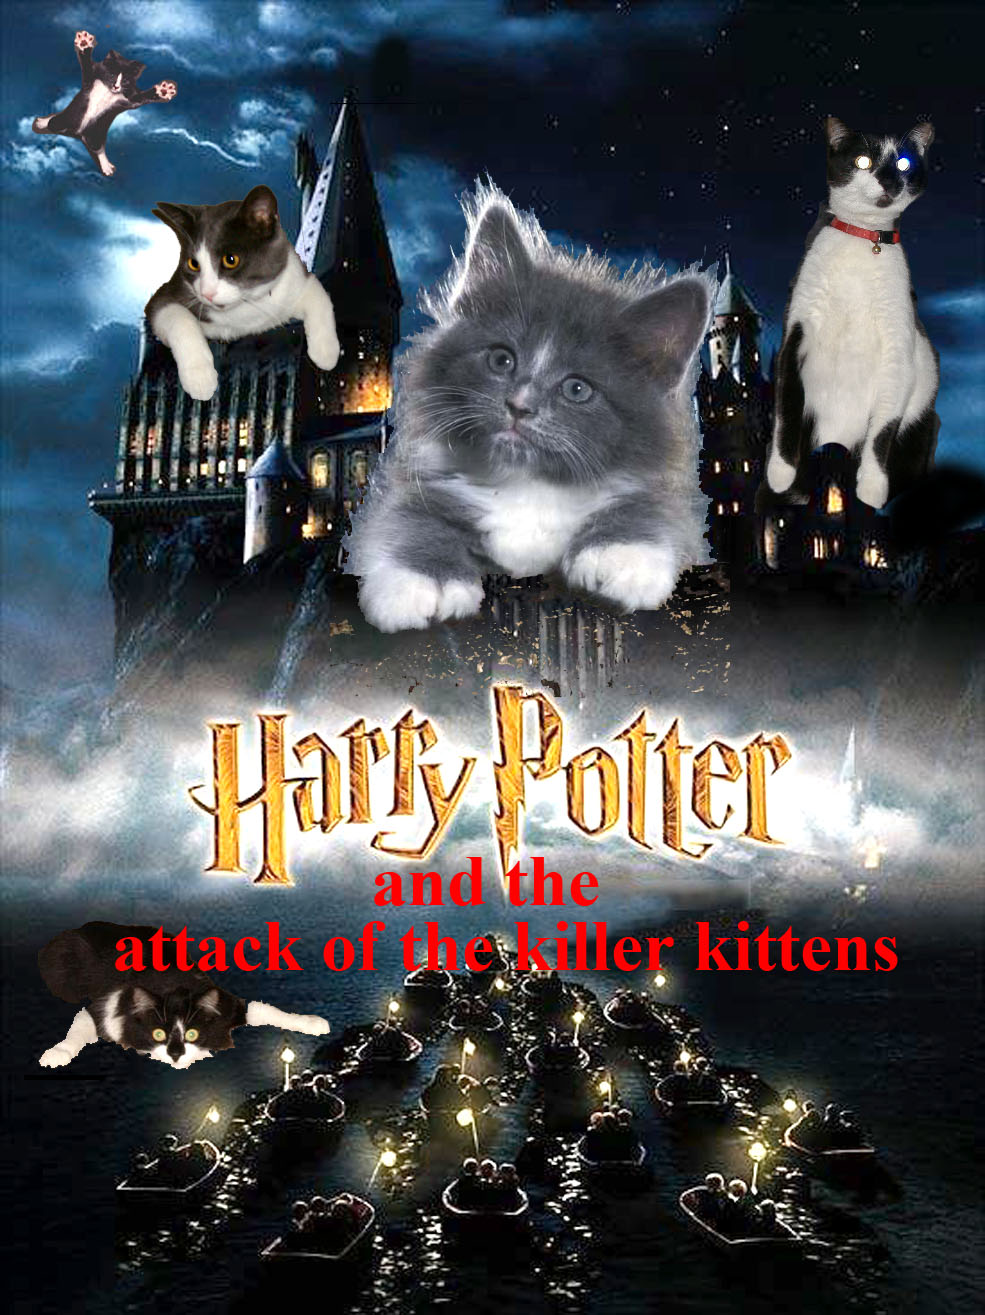 Harry Potter And The Attack Of The Killer Kittens by DARKSHADOW18